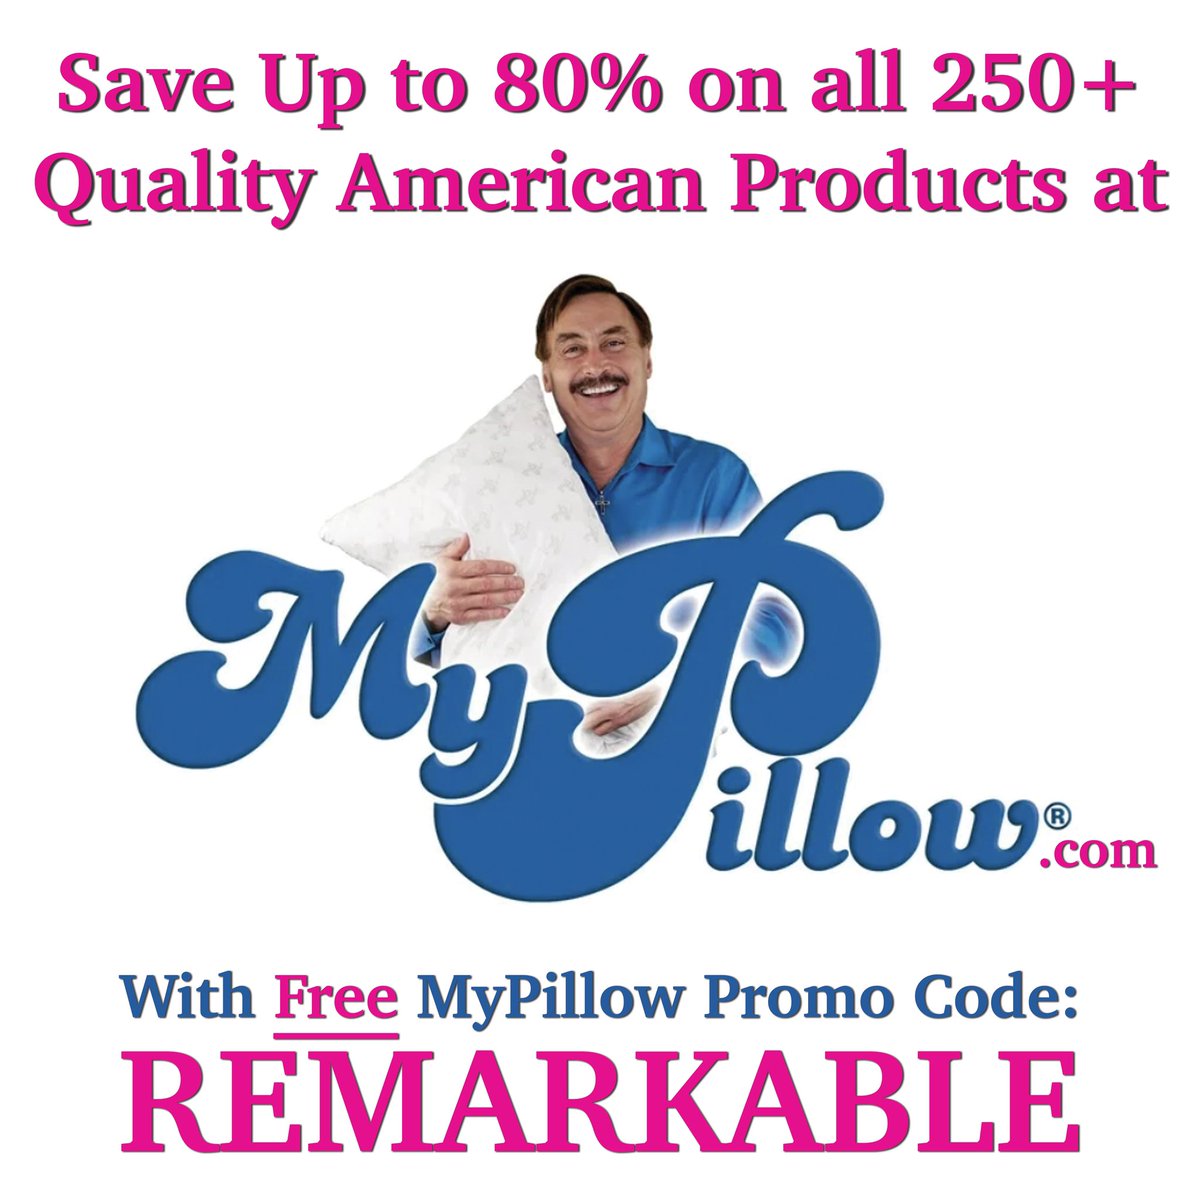 I am so thankful and grateful for MyPillow. I have slept better with their products in the last 6 months than I have maybe ever. Shop now with promo code, “Remarkable” for up to 80% off your entire order!
#GodBlessAmerica #FreeCouponCode #FreePromoCode #MyPillow #RemarkablePeople